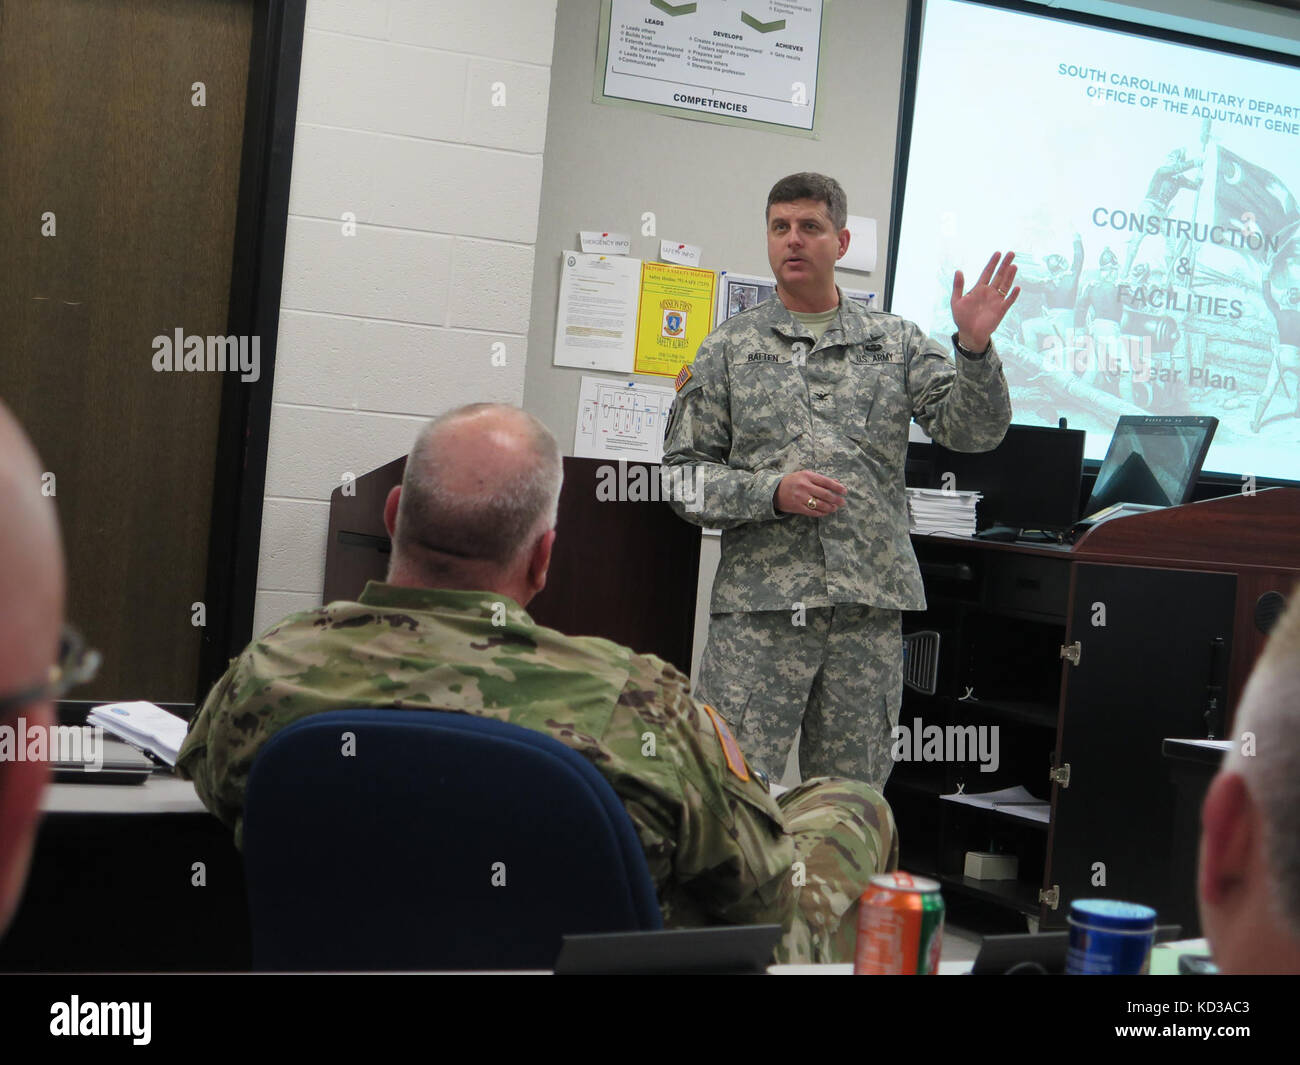 U.S. Army Col. Andrew Batten, director of facilities management, S.C. National Guard, provides an update on armories and facilities to participants in the 2015 S.C. National Guard Leaders Call held at the Soldier's Support Institute on Fort Jackson, Columbia, S.C., Dec. 12, 2015.  The annual gathering hosted by U.S. Army Maj. Gen. Robert E. Livingston, Jr., the adjutant general for South Carolina, provides a forum for leaders from brigade to company level in the organization to receive updates from key staff on the strategic plan and projections for missions, as well as discuss training and re Stock Photo